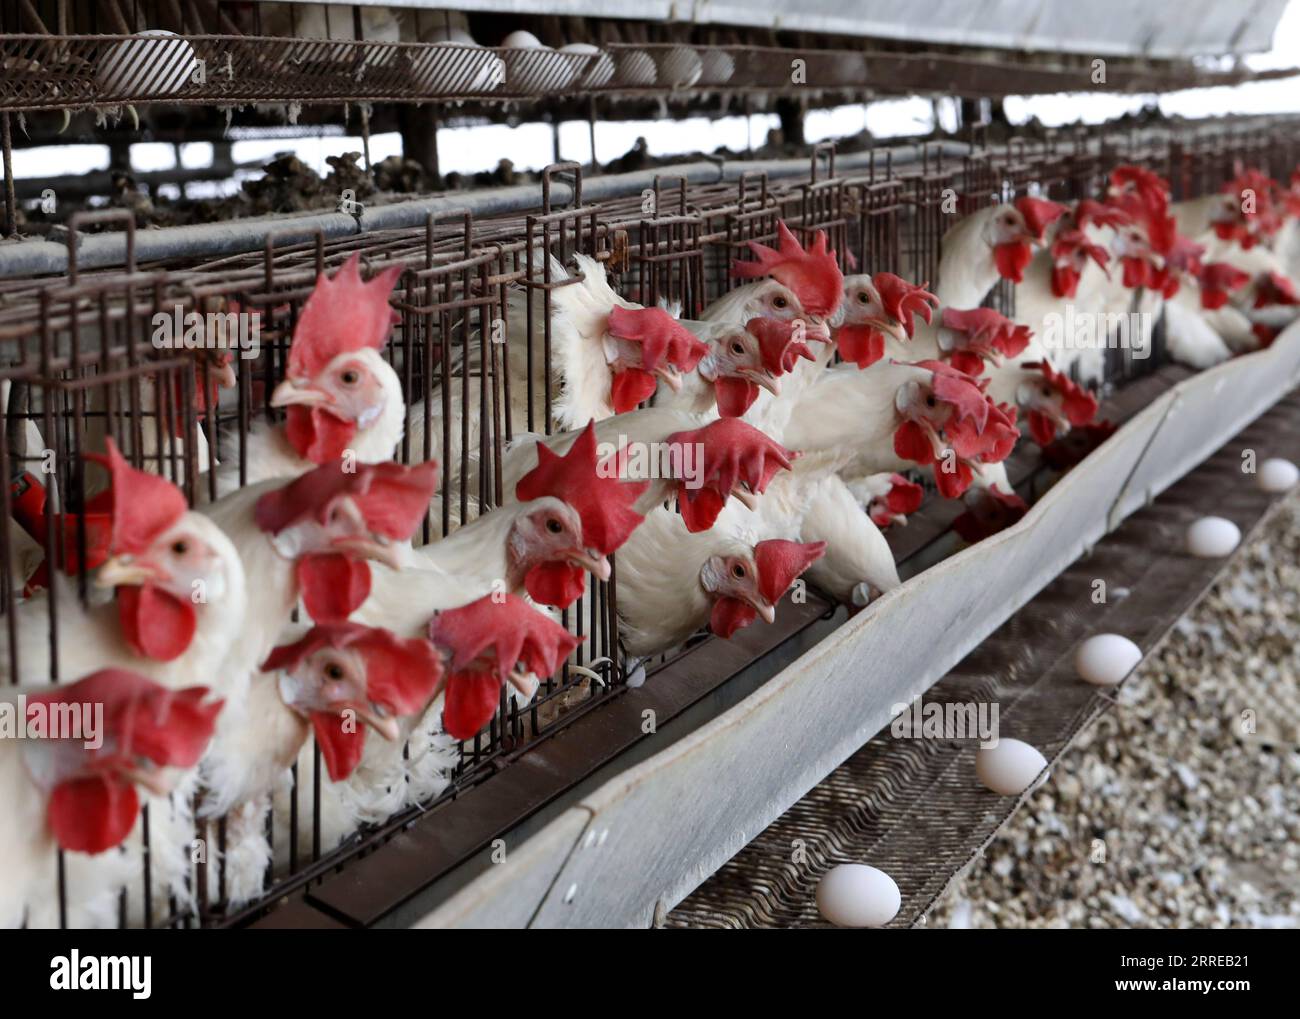 220216 -- KIRYAT MALAKHI, Feb. 16, 2022 -- White Leghorn egg-laying chickens are seen in cages in their hen house at Arugot village near Israeli city of Kiryat Malakhi on Feb. 15, 2022. Israel s Ministry of Agriculture and Rural Development on Monday announced new regulations regarding the use of hen cages in the egg industry. The regulations stipulate that from now on every new hen coop must be without cages, and from June 2029, any use of cage coops in the country will be banned. Photo by /Xinhua ISRAEL-KIRYAT MALAKHI-CHICKENS GilxCohenxMagen PUBLICATIONxNOTxINxCHN Stock Photo